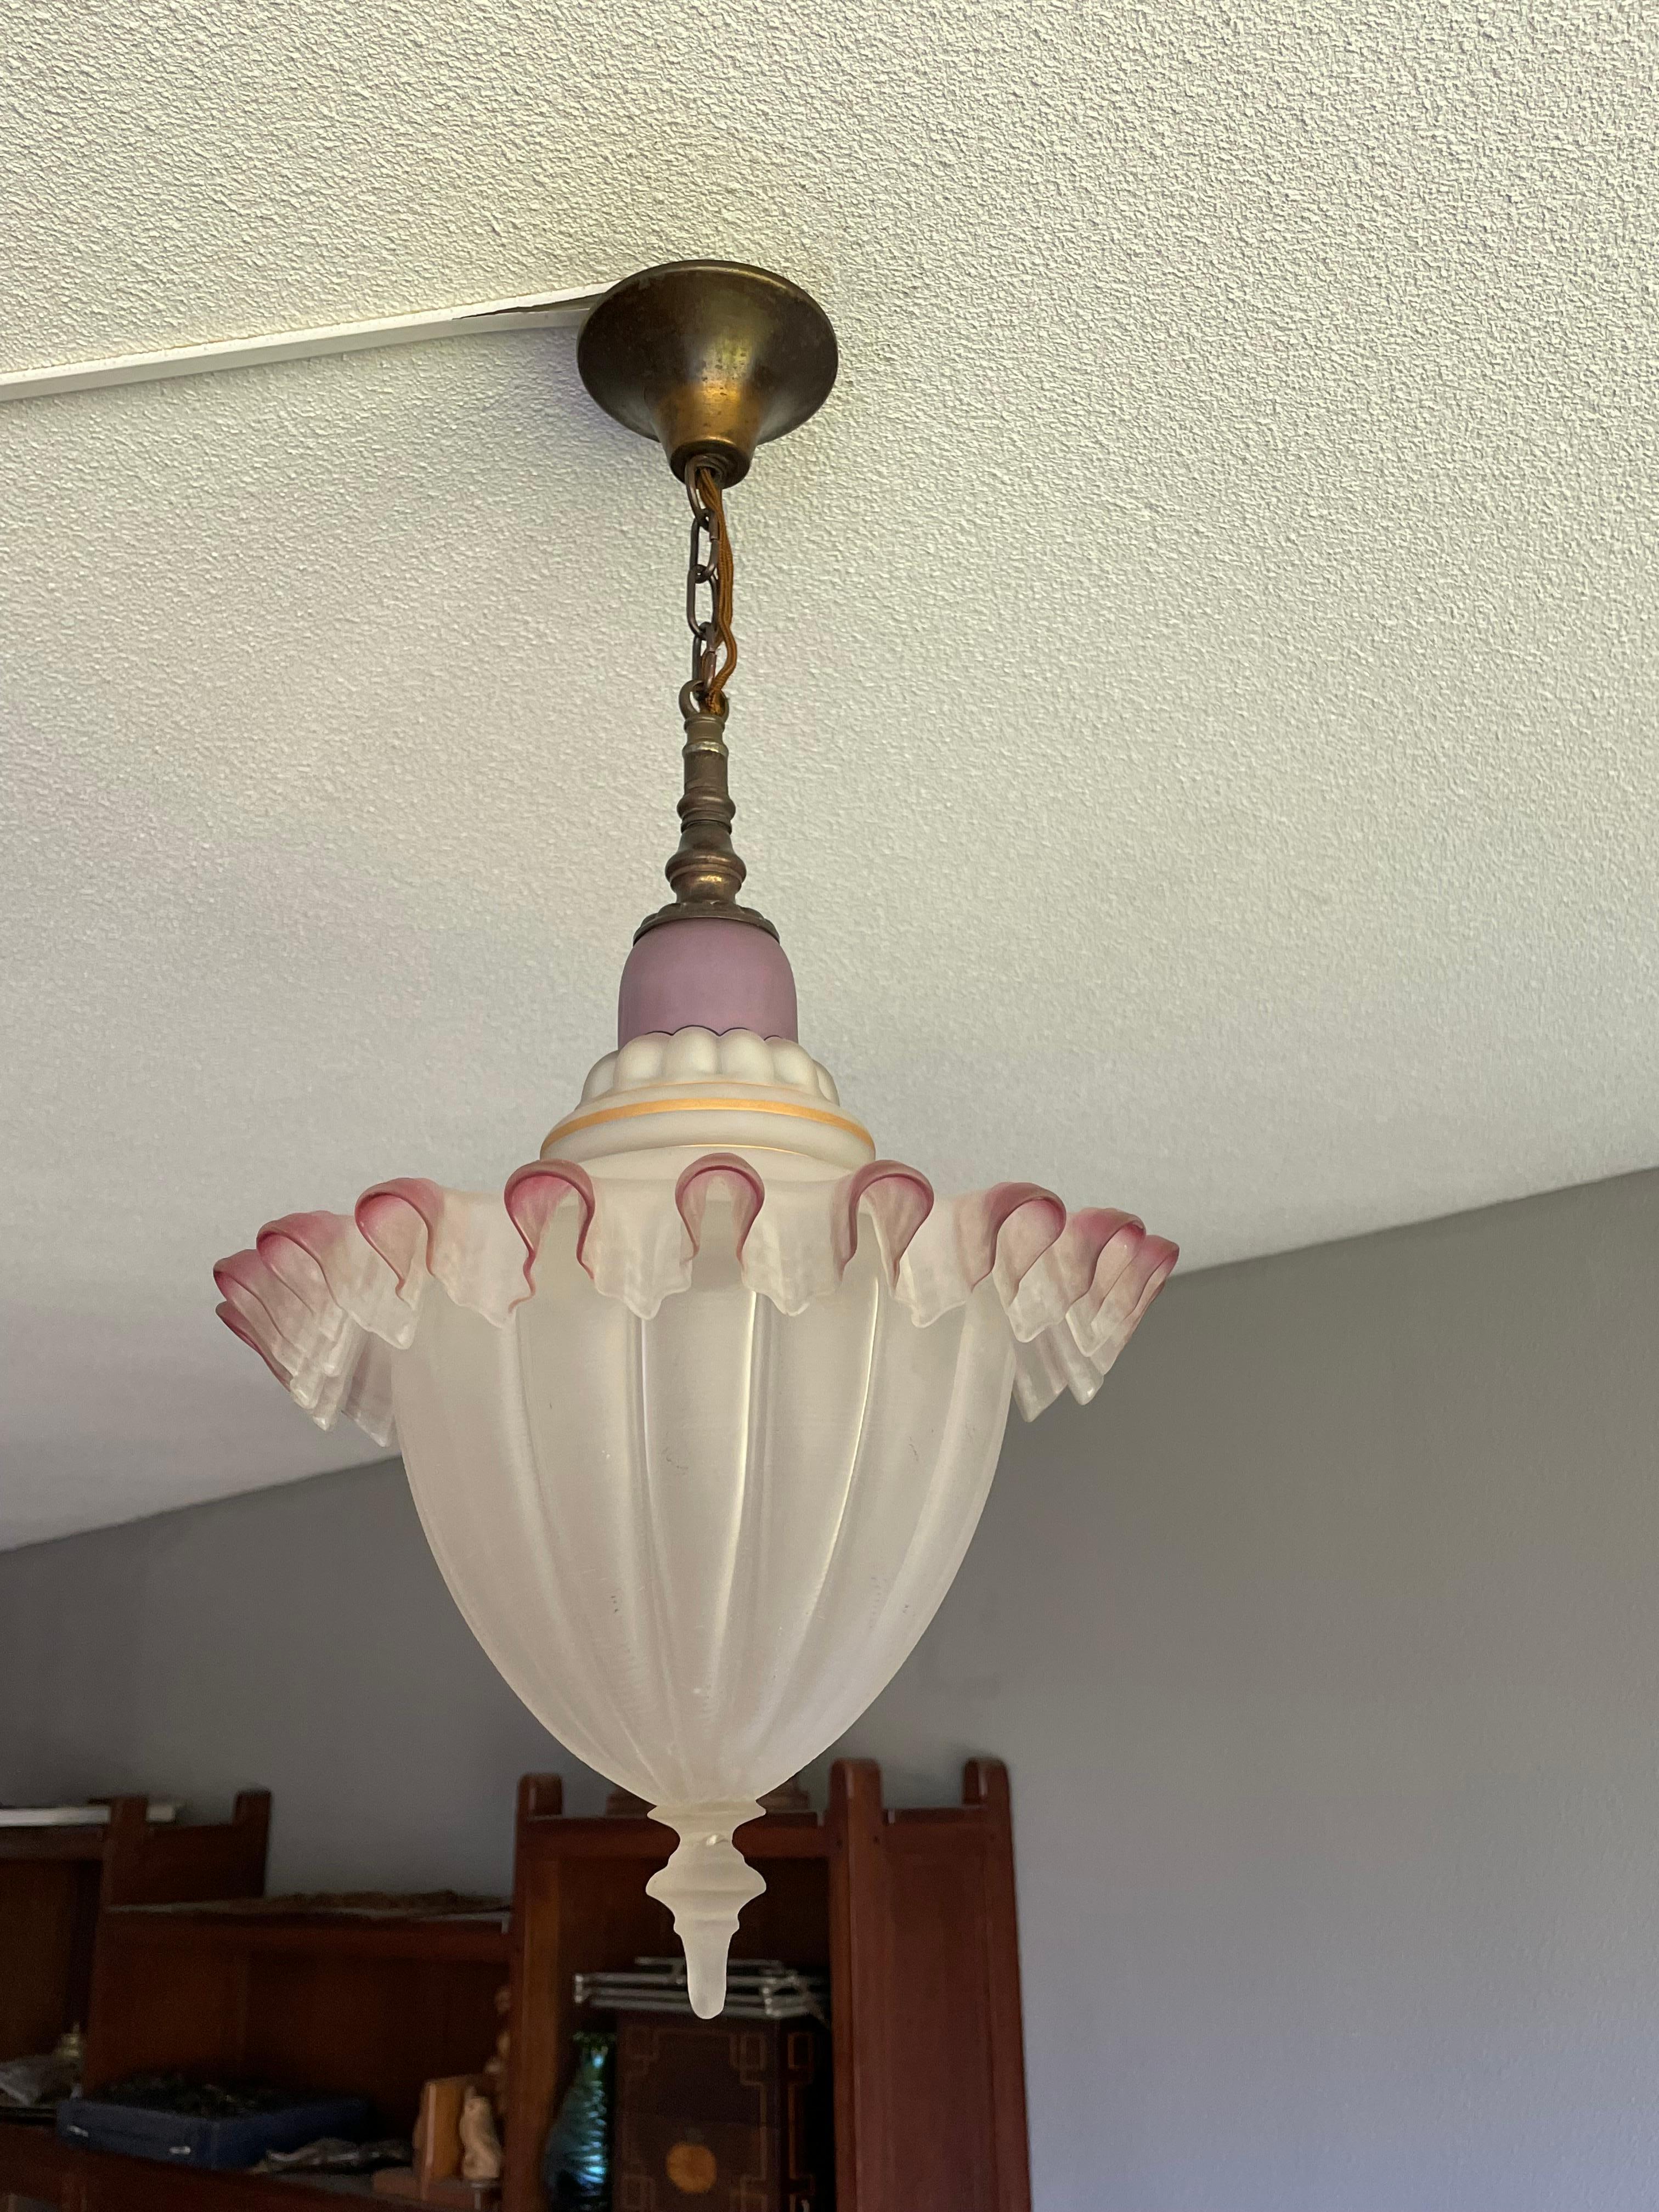 Incredibly beautiful and truly stylish antique light fixture.

This rare, beautifully designed, very stylish, all hand-crafted and excellent condition pendant is destined to grace the living space of someone with exceptional taste. We know that is a